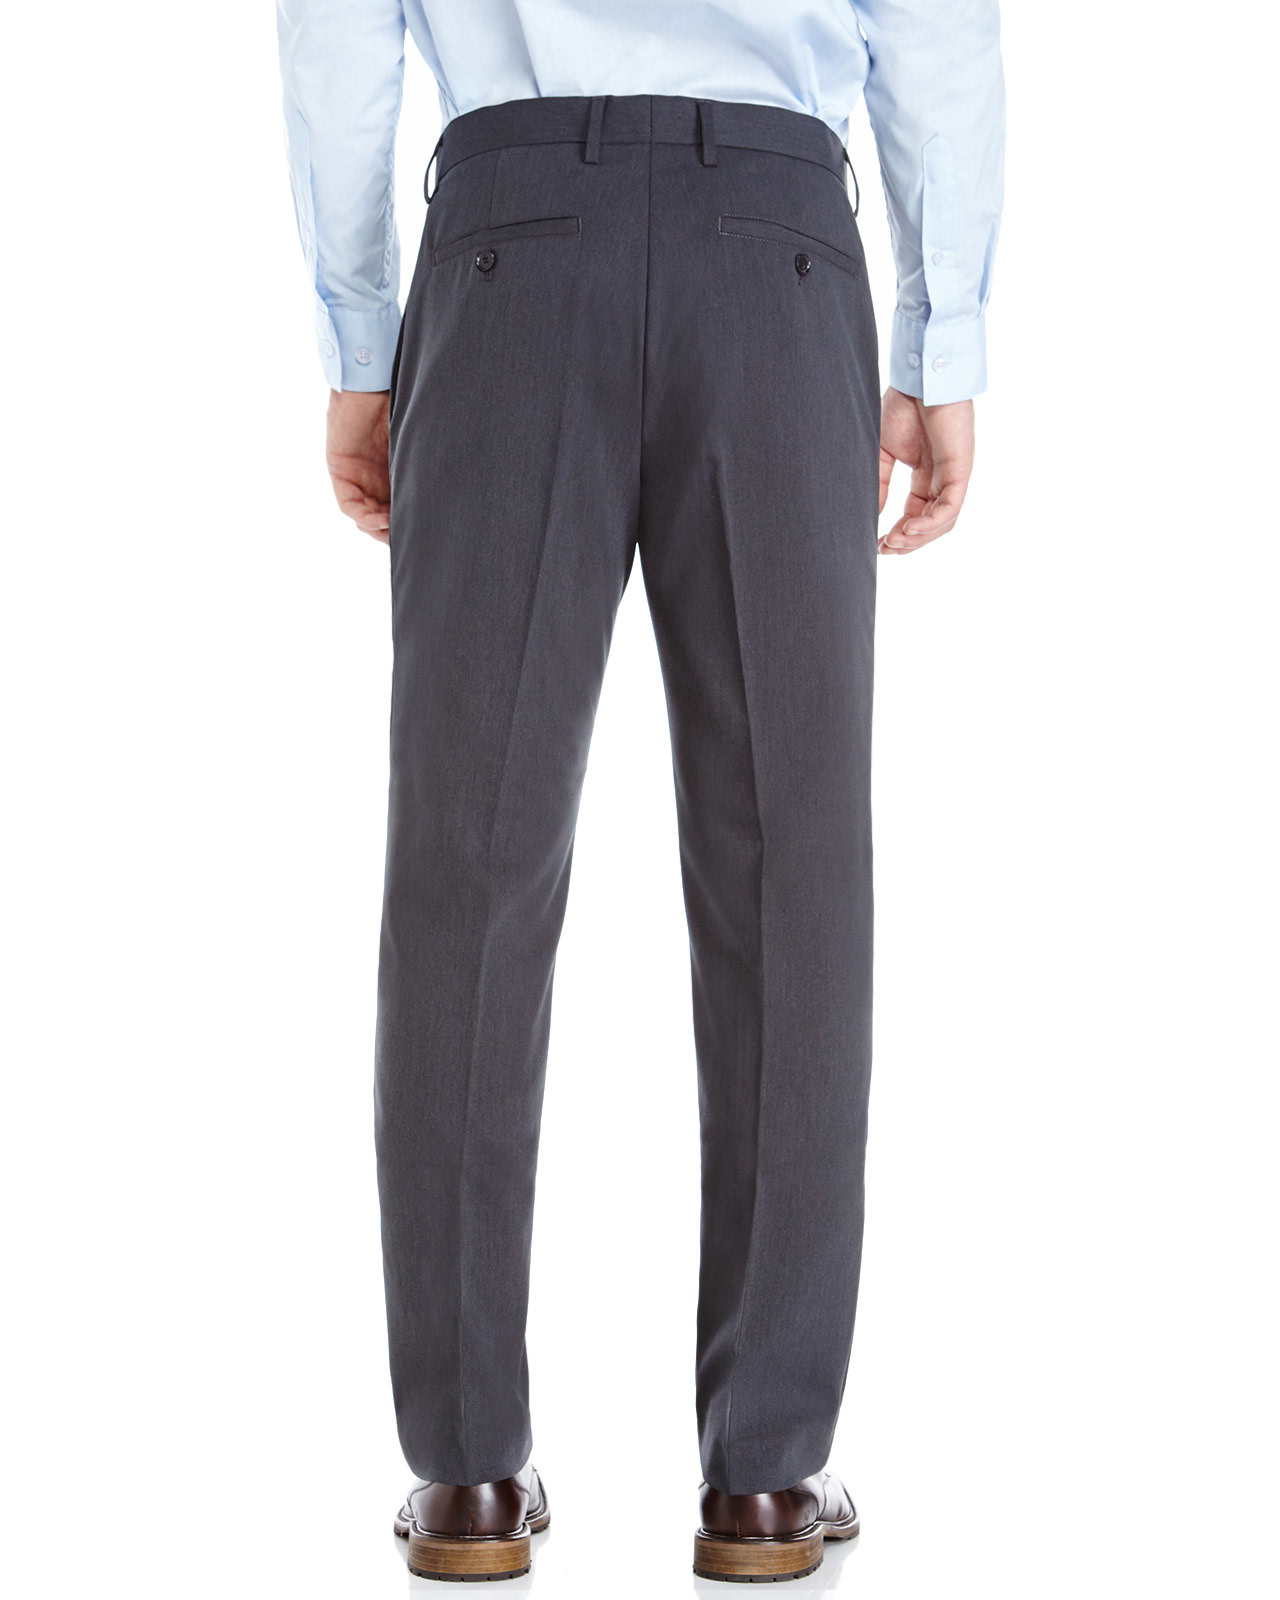 Lyst - English laundry Flat Front Pants in Gray for Men